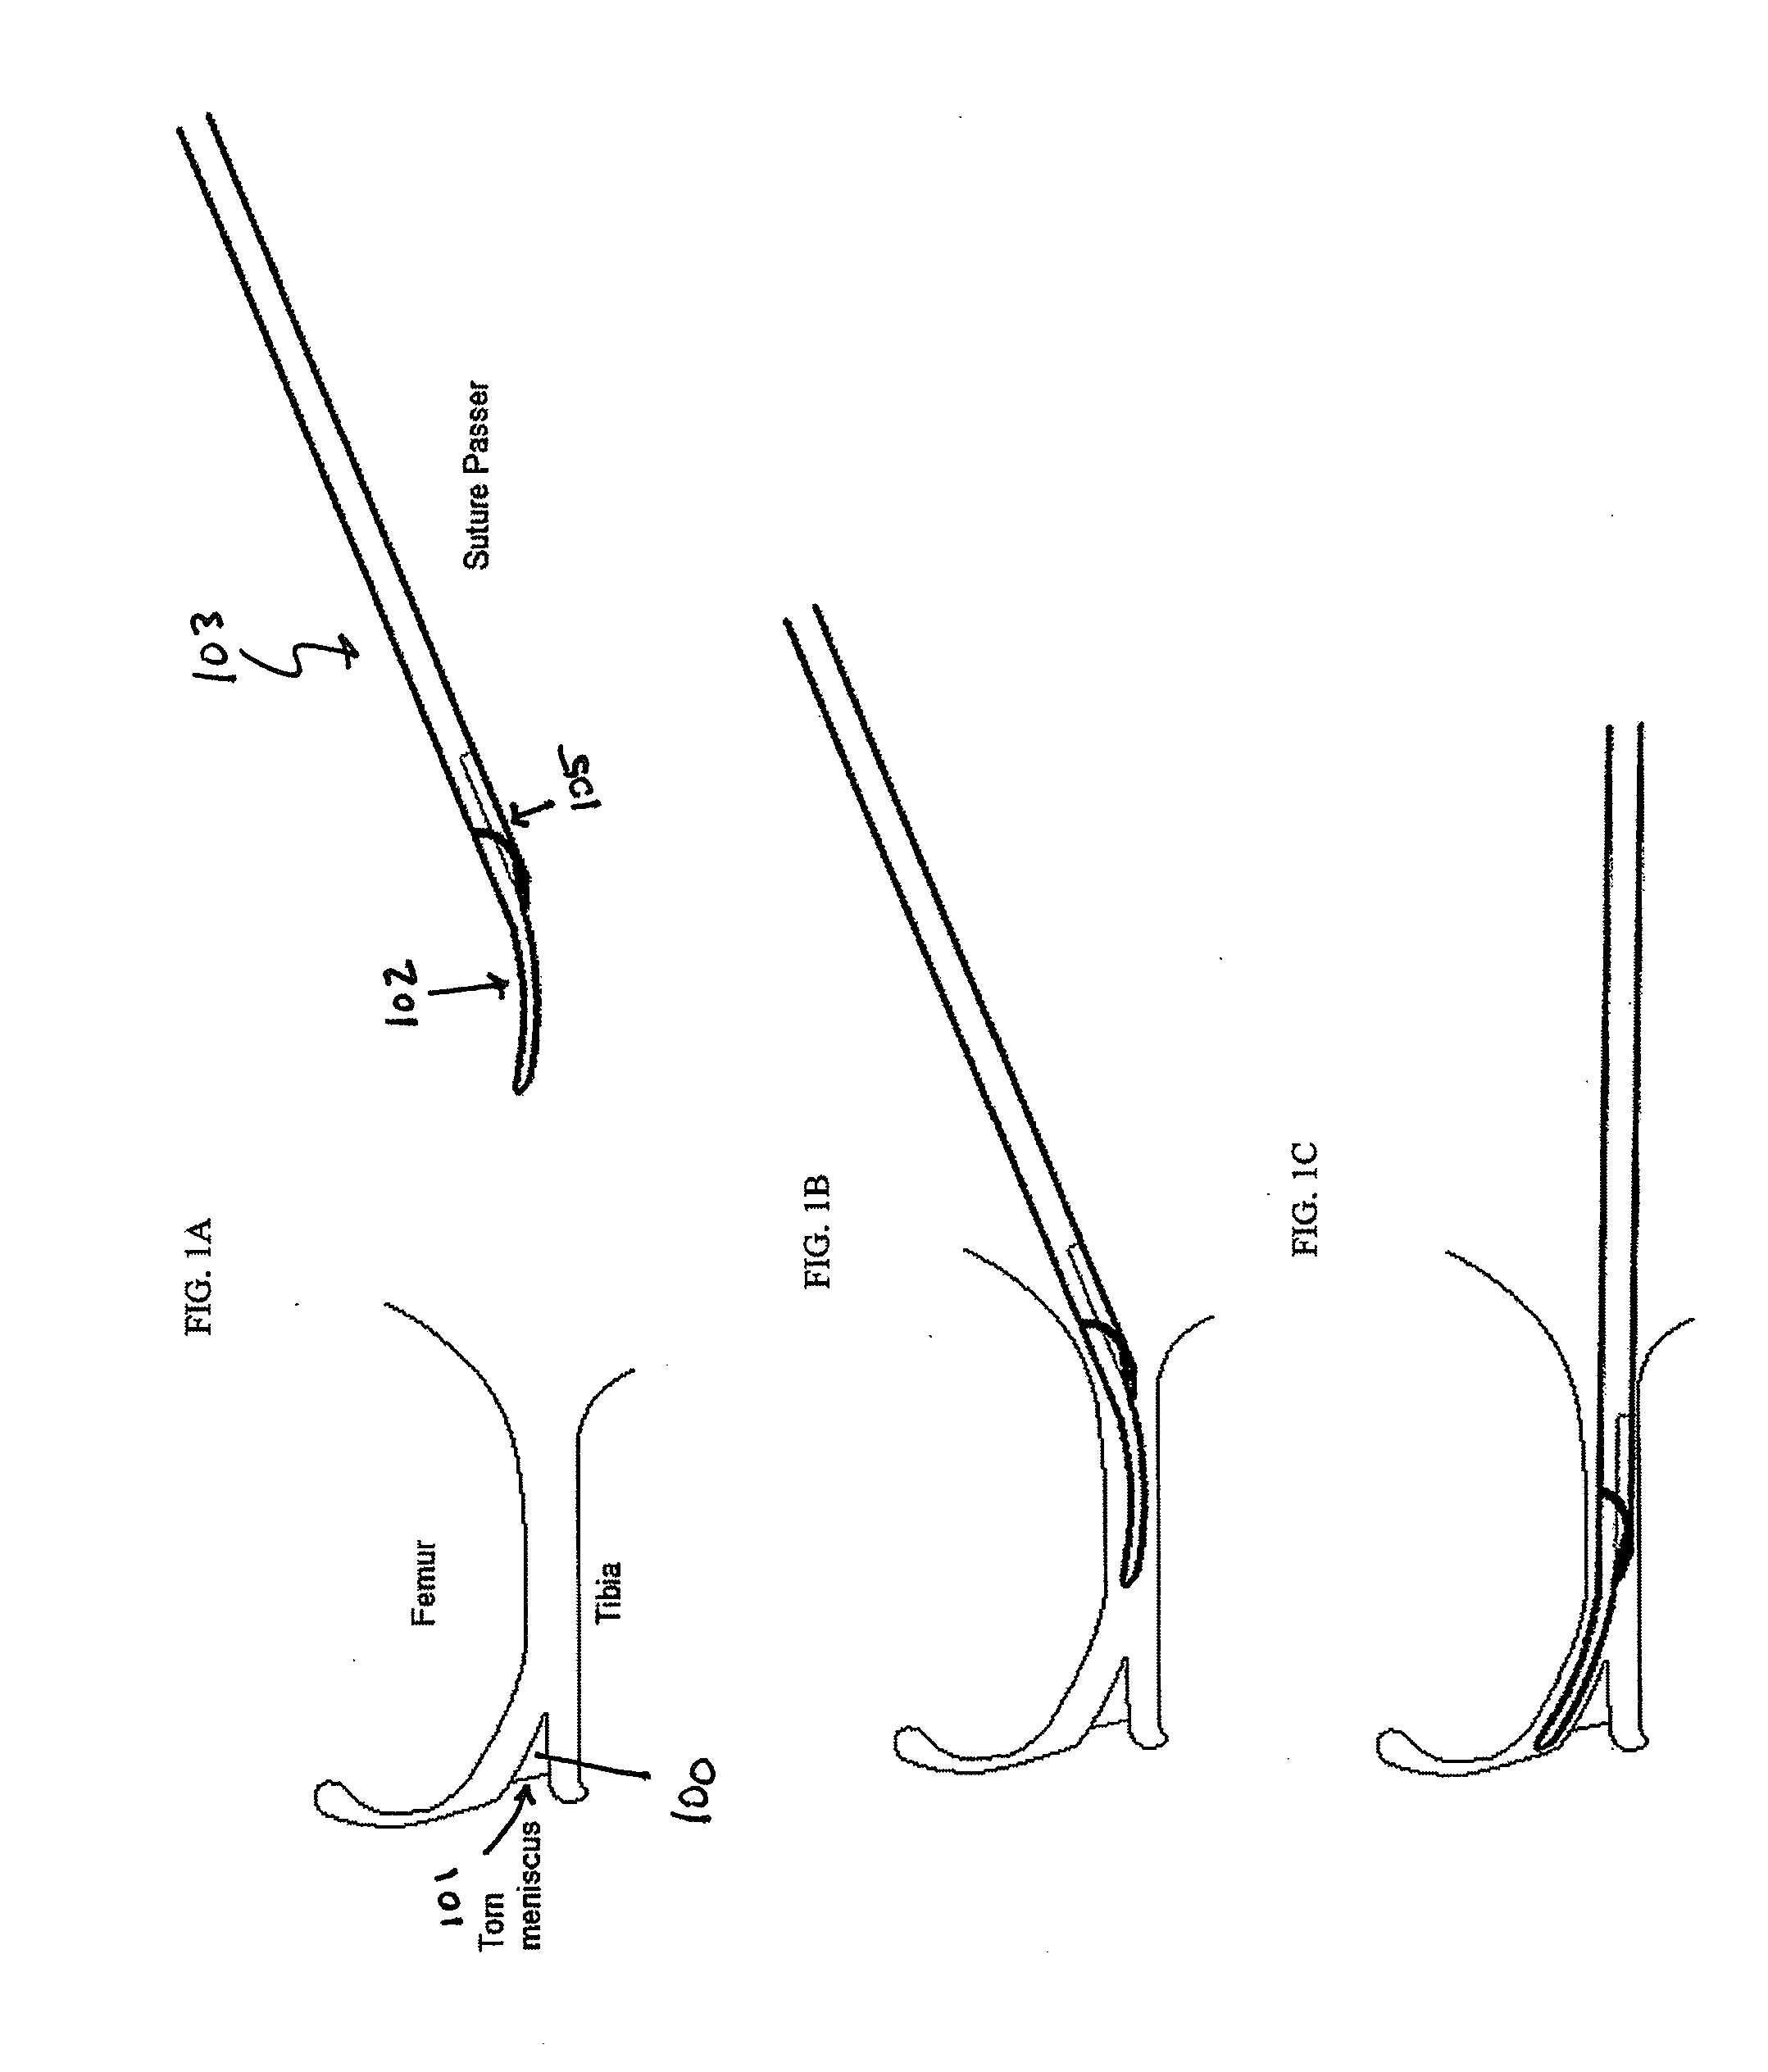 Devices, systems and methods for meniscus repair